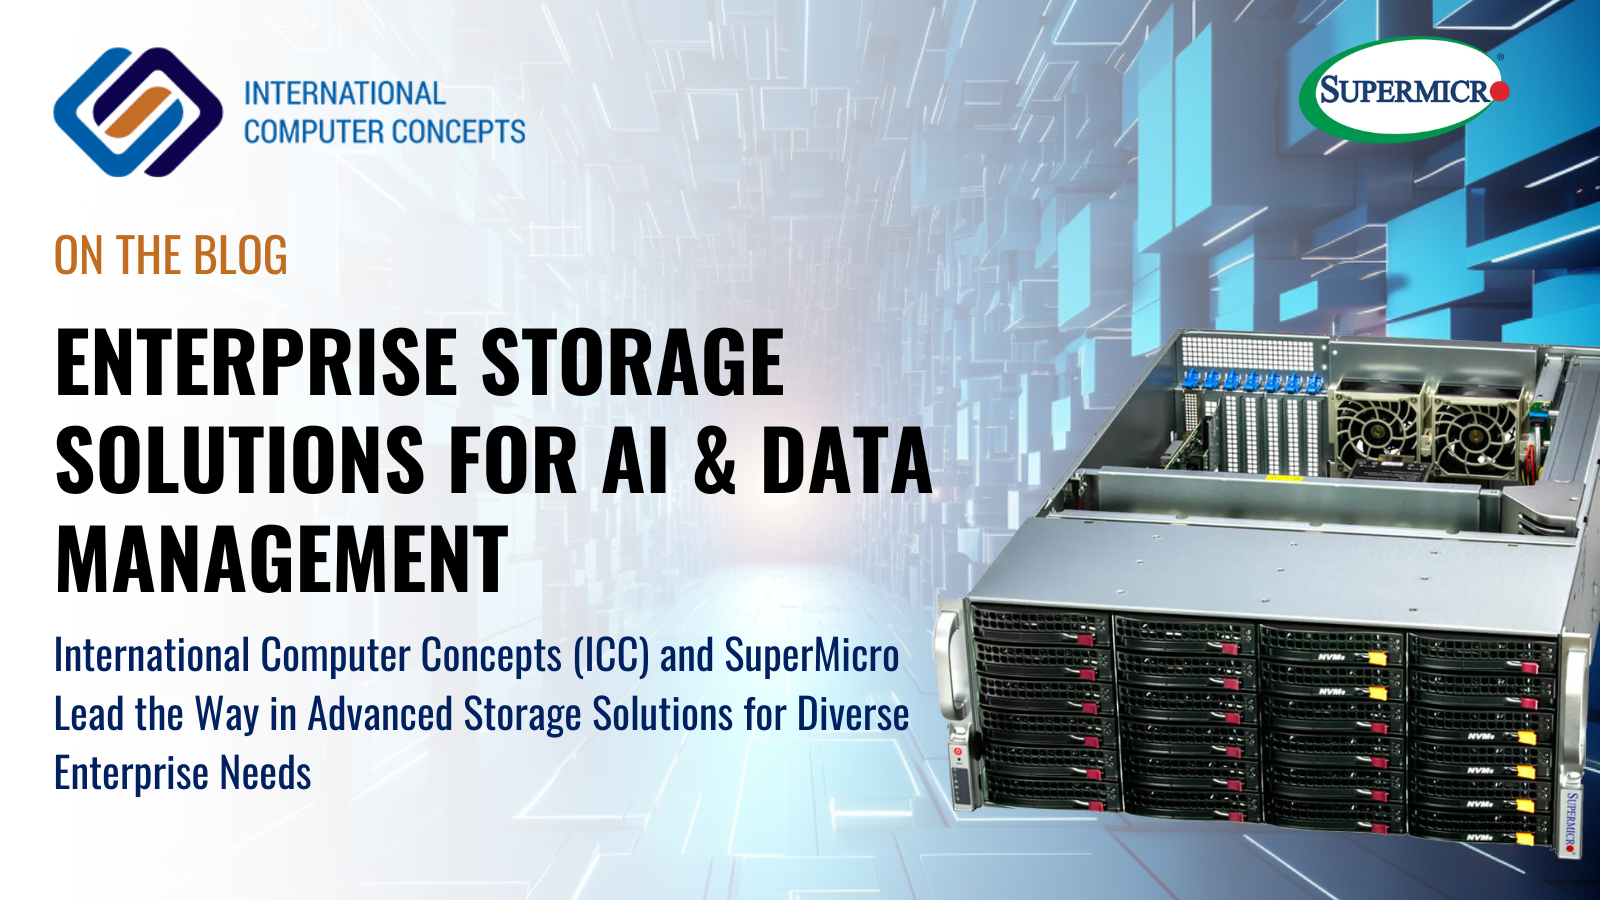 International Computer Concepts (ICC) and SuperMicro Lead the Way in Advanced Storage Solutions for Diverse Enterprise Needs